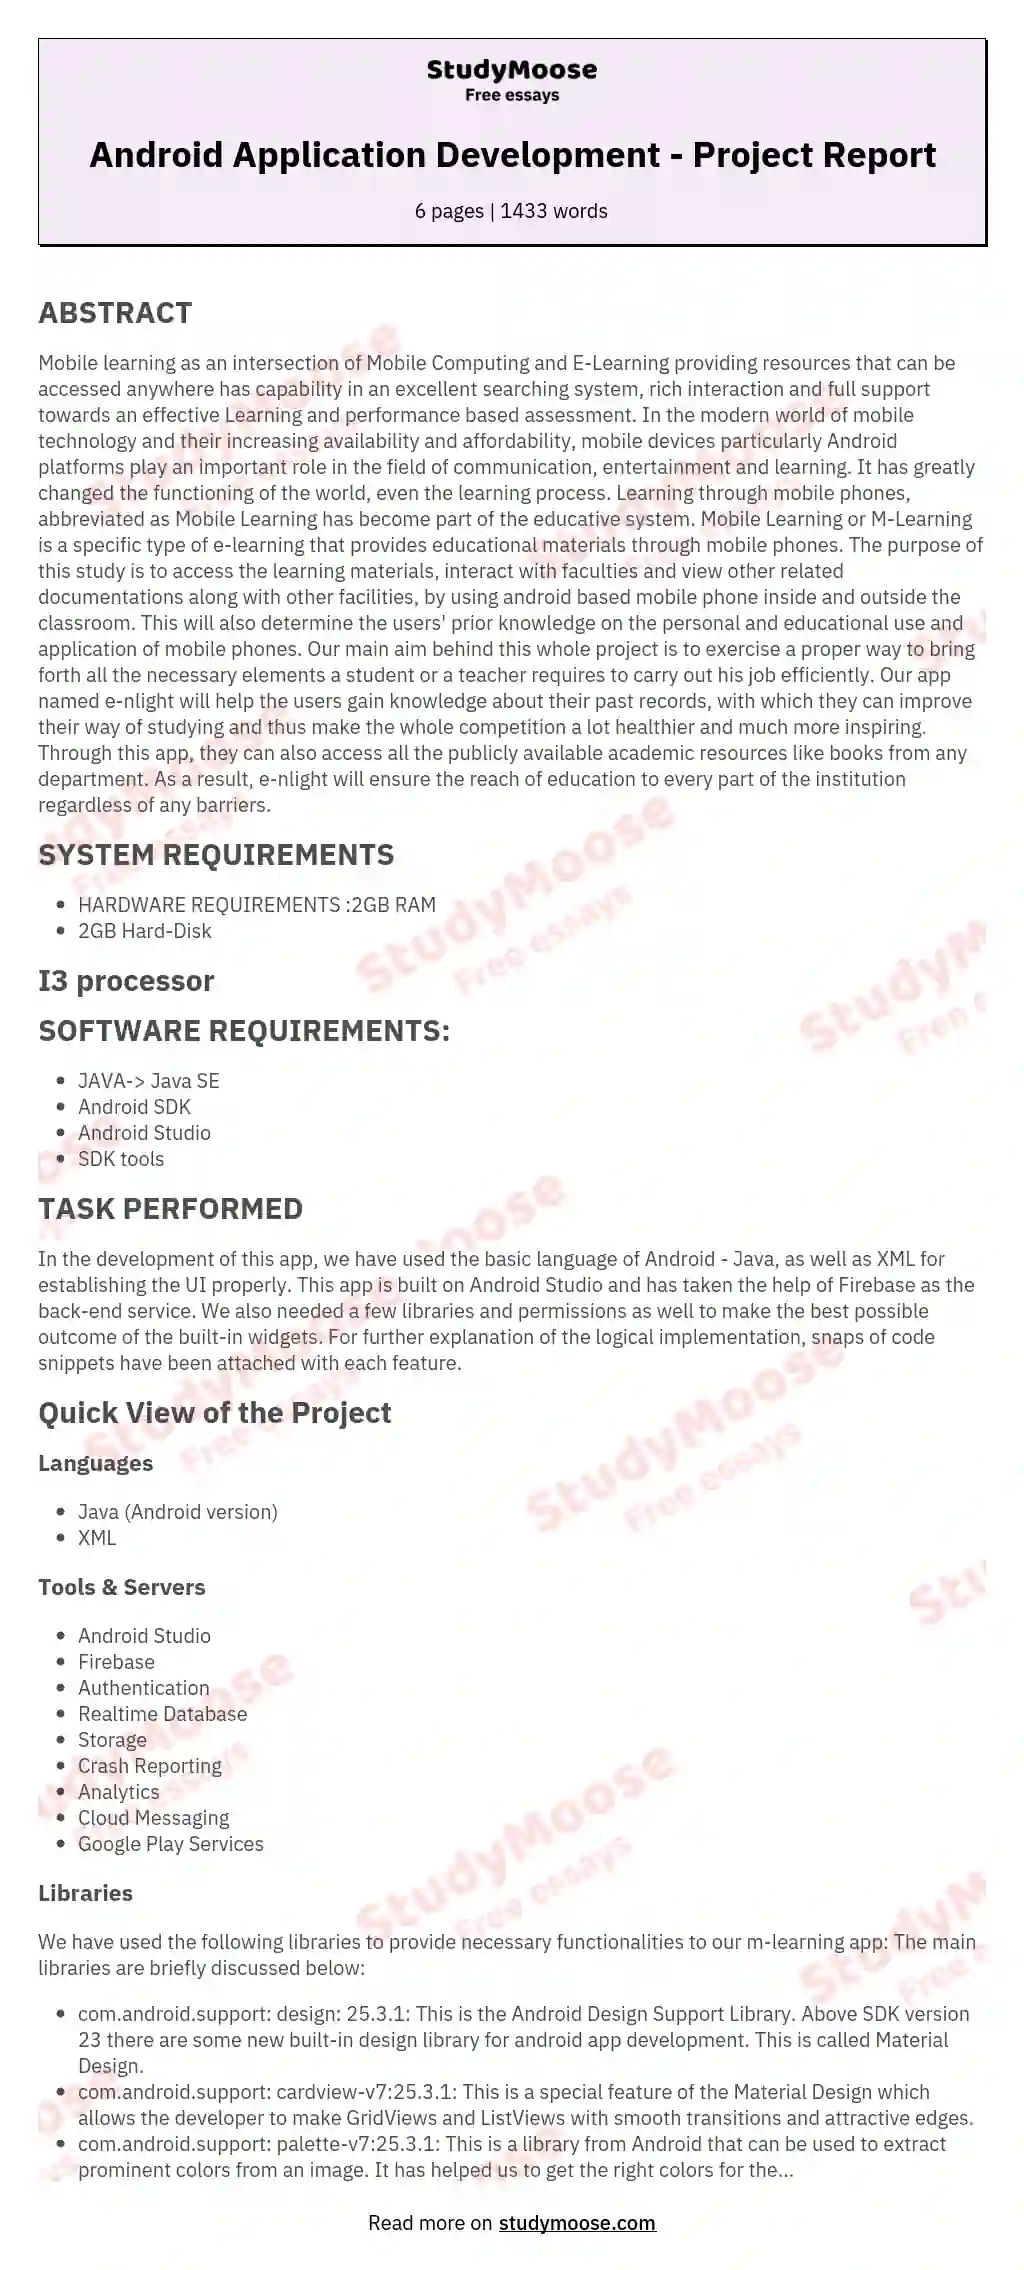 Android Application Development - Project Report essay